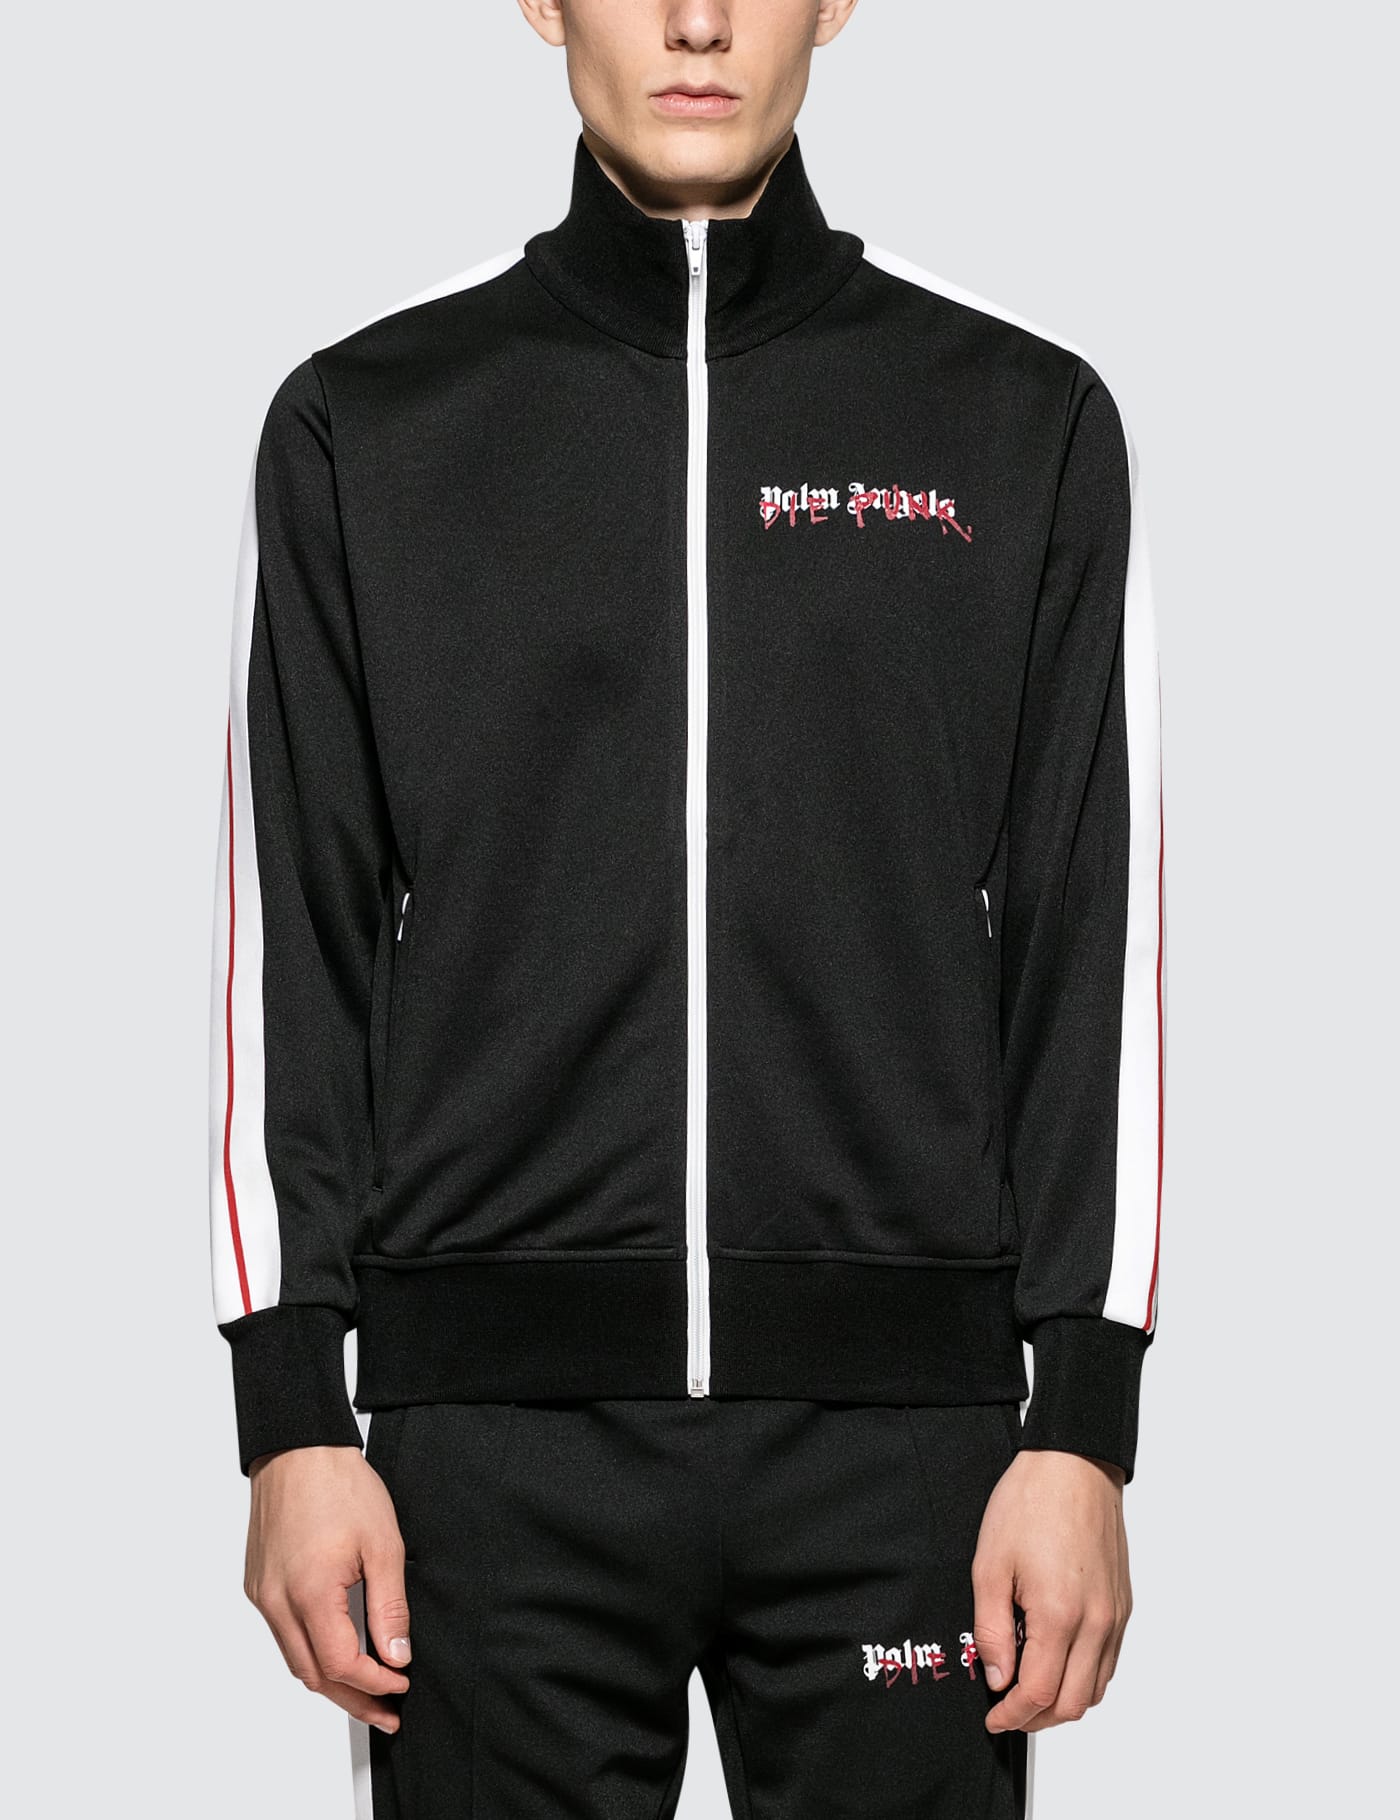 Palm Angels - Pc Die Punk Track Jacket | HBX - Globally Curated 